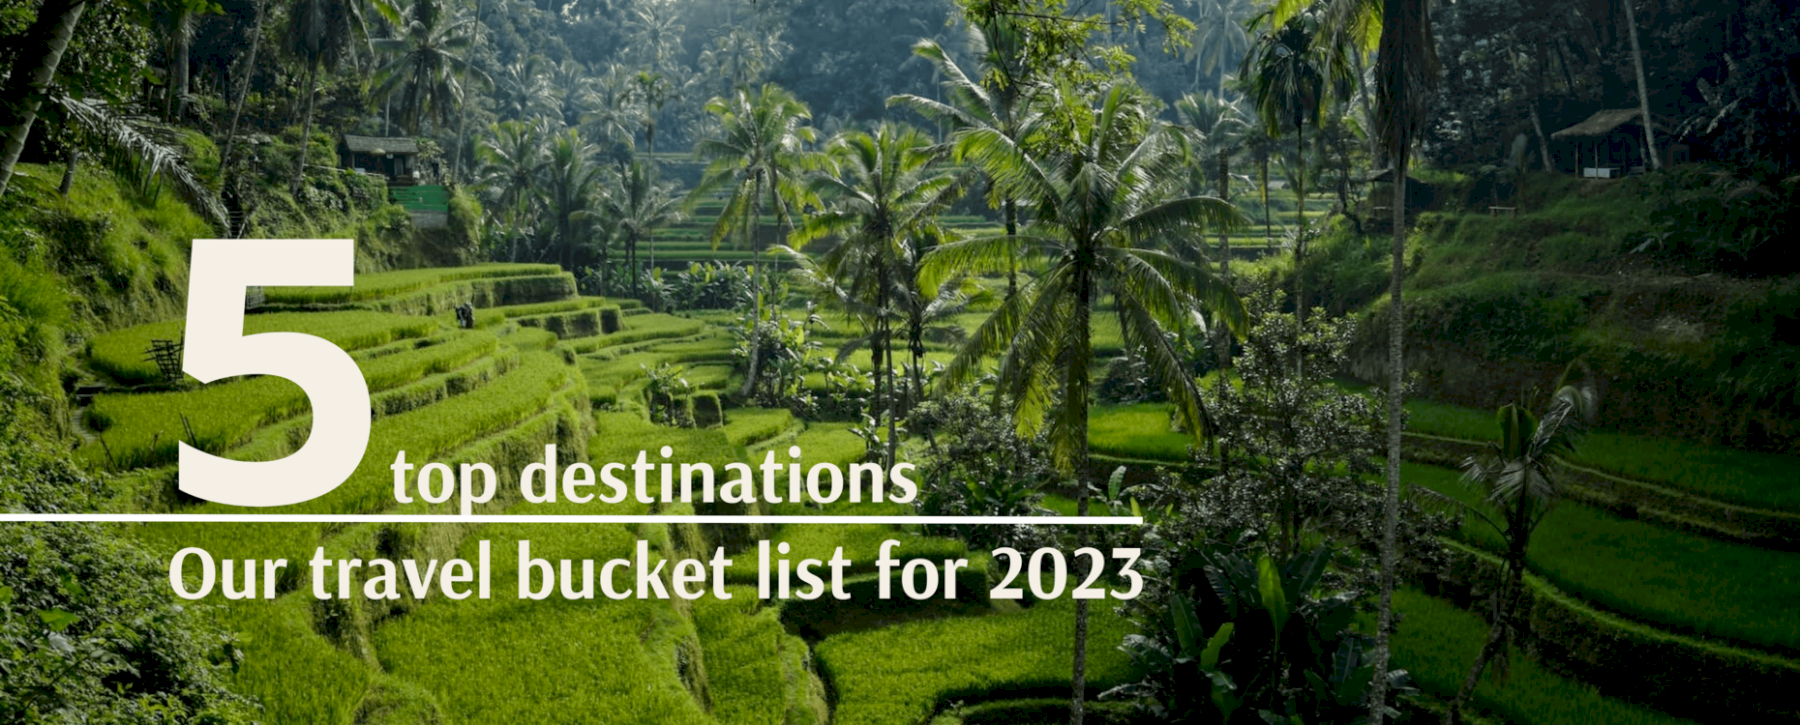 Our travel bucket list for this year: Five top destinations